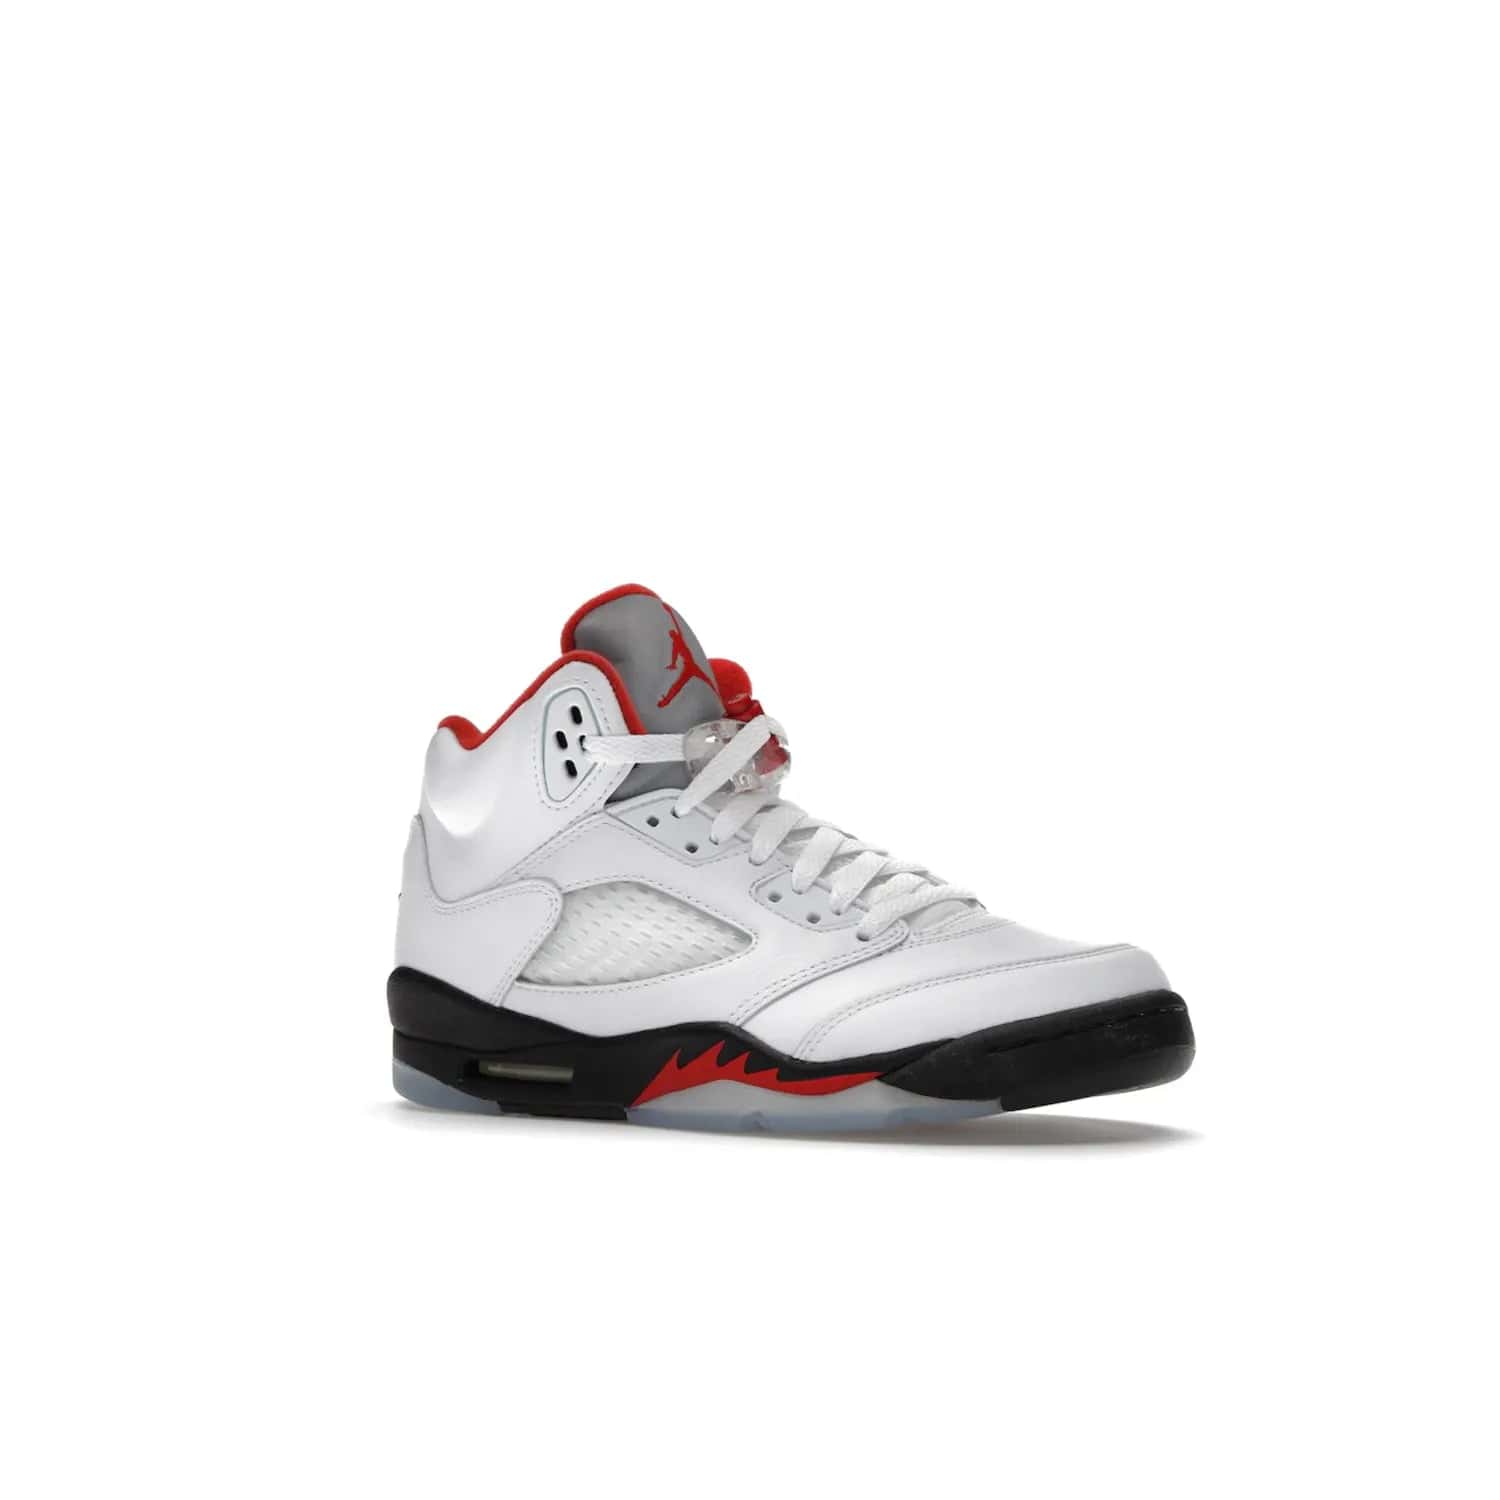 Jordan 5 Retro Fire Red Silver Tongue (2020) (GS) - Image 4 - Only at www.BallersClubKickz.com - A stylish option for any grade schooler. The Air Jordan 5 Retro Fire Red Silver Tongue 2020 GS features a combination of four hues, premium white leather, a clear mesh mid-upper and a reflective silver tongue. An icy translucent blue outsole completes the look. Available on May 2, $150.